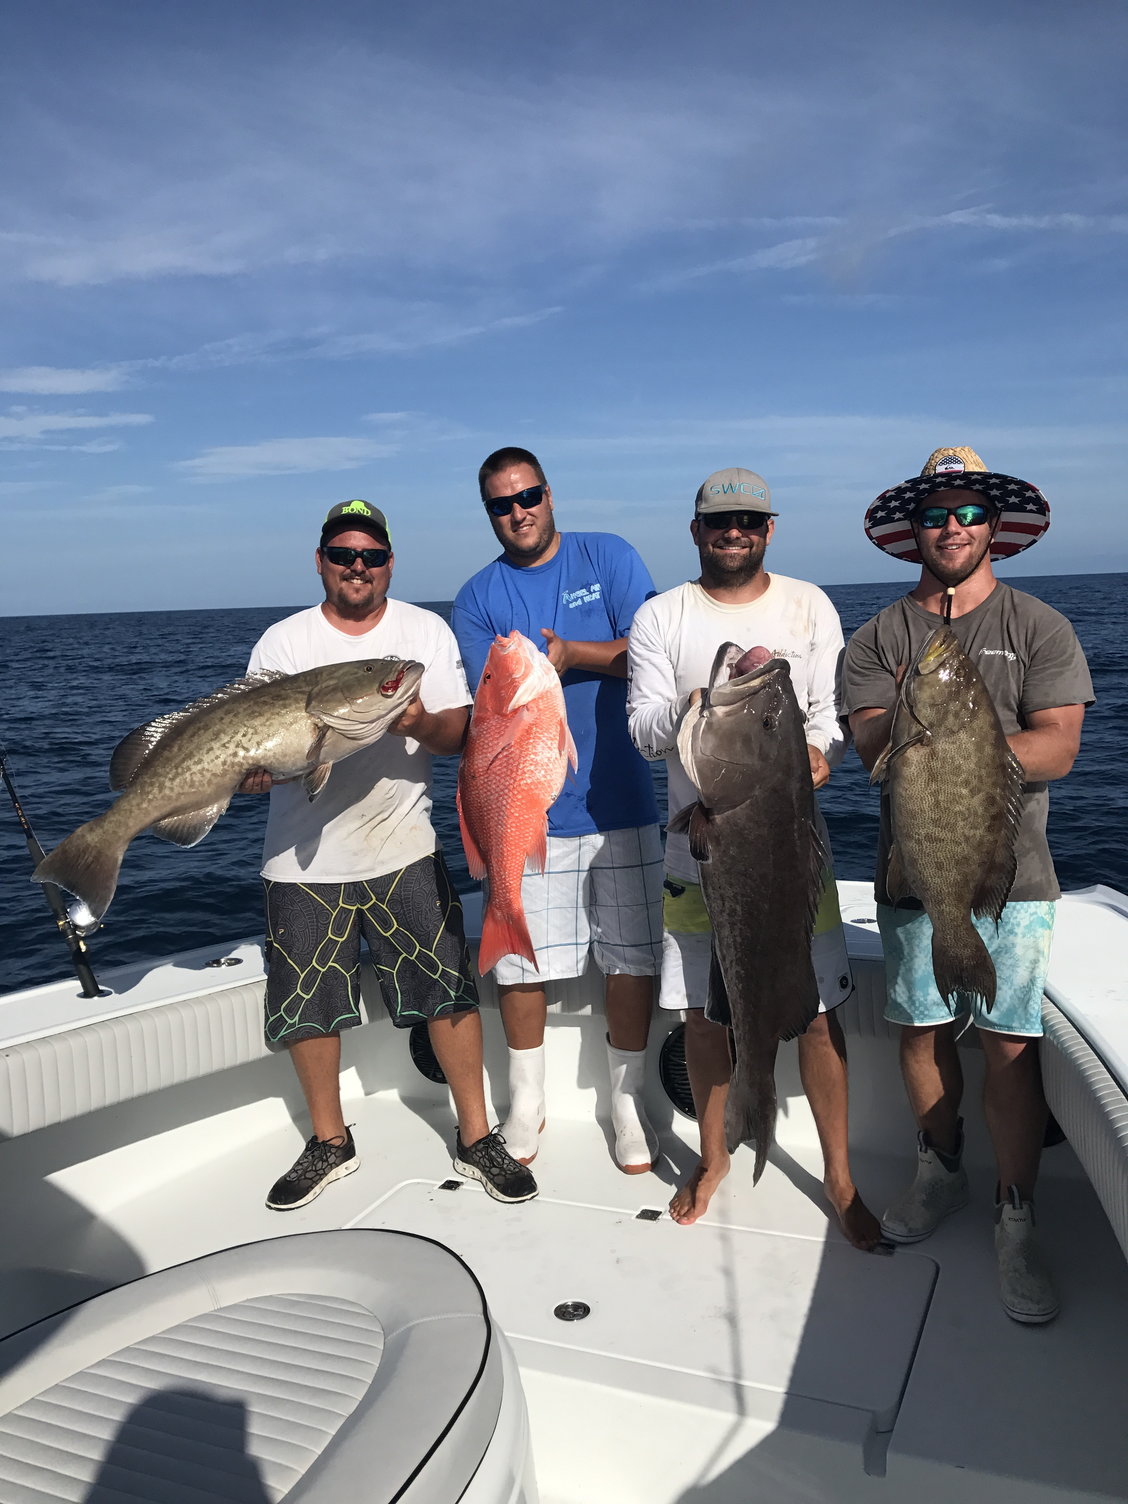 Rod and reel for Grouper. - Page 3 - The Hull Truth - Boating and Fishing  Forum